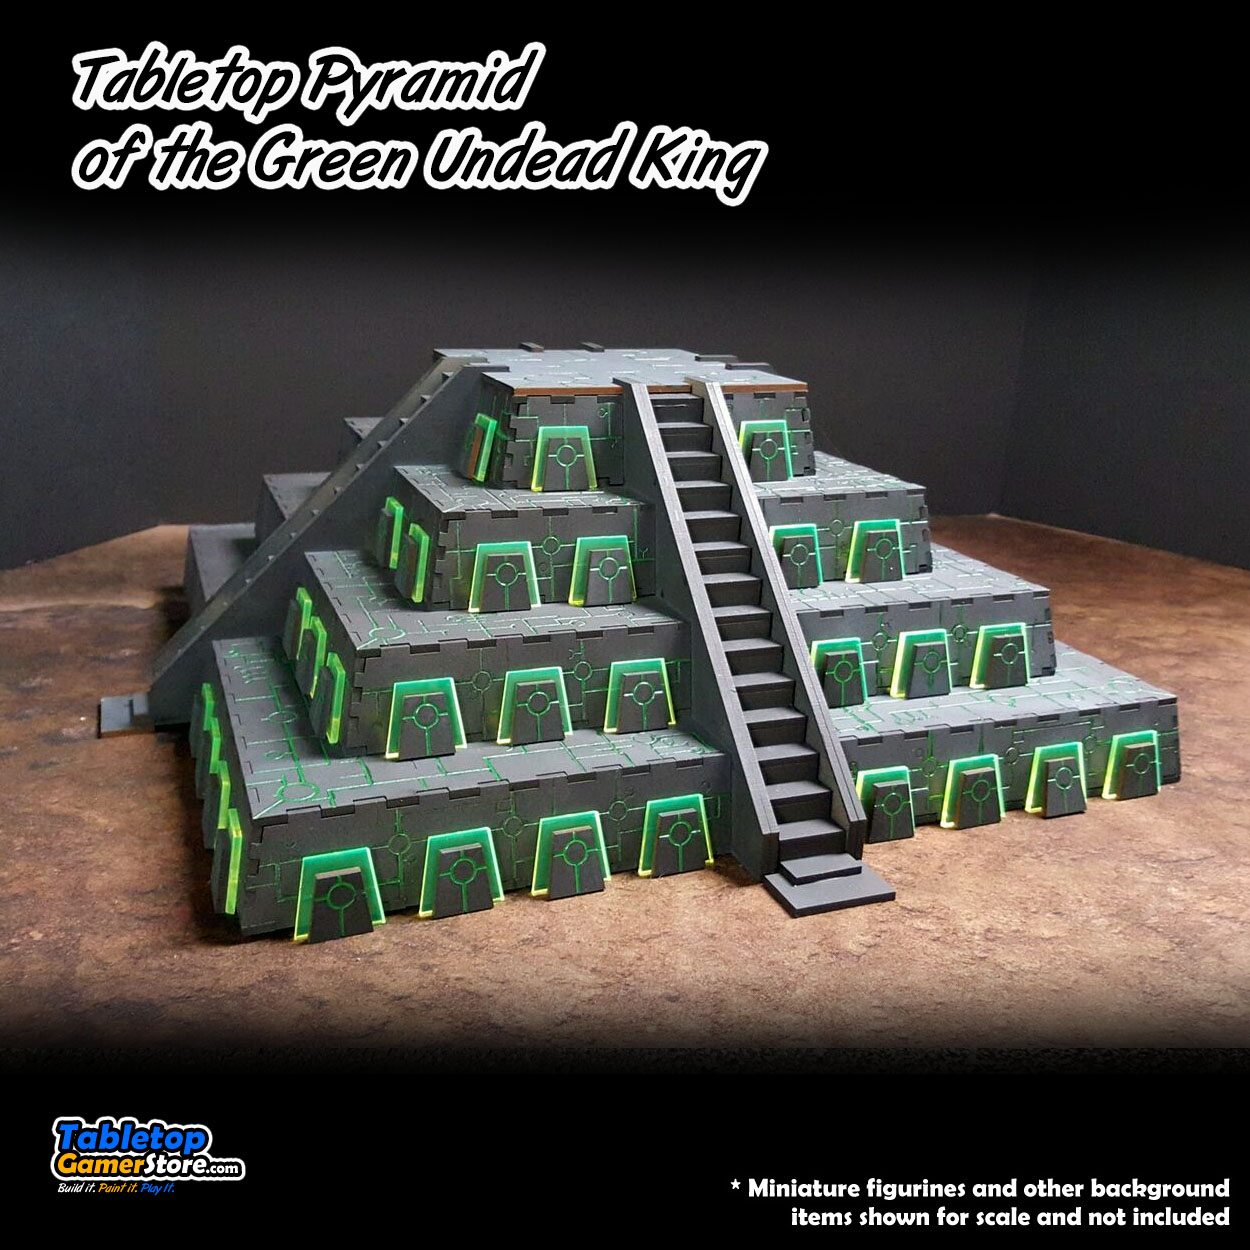 tabletop_pyramid_green_undead_king_01